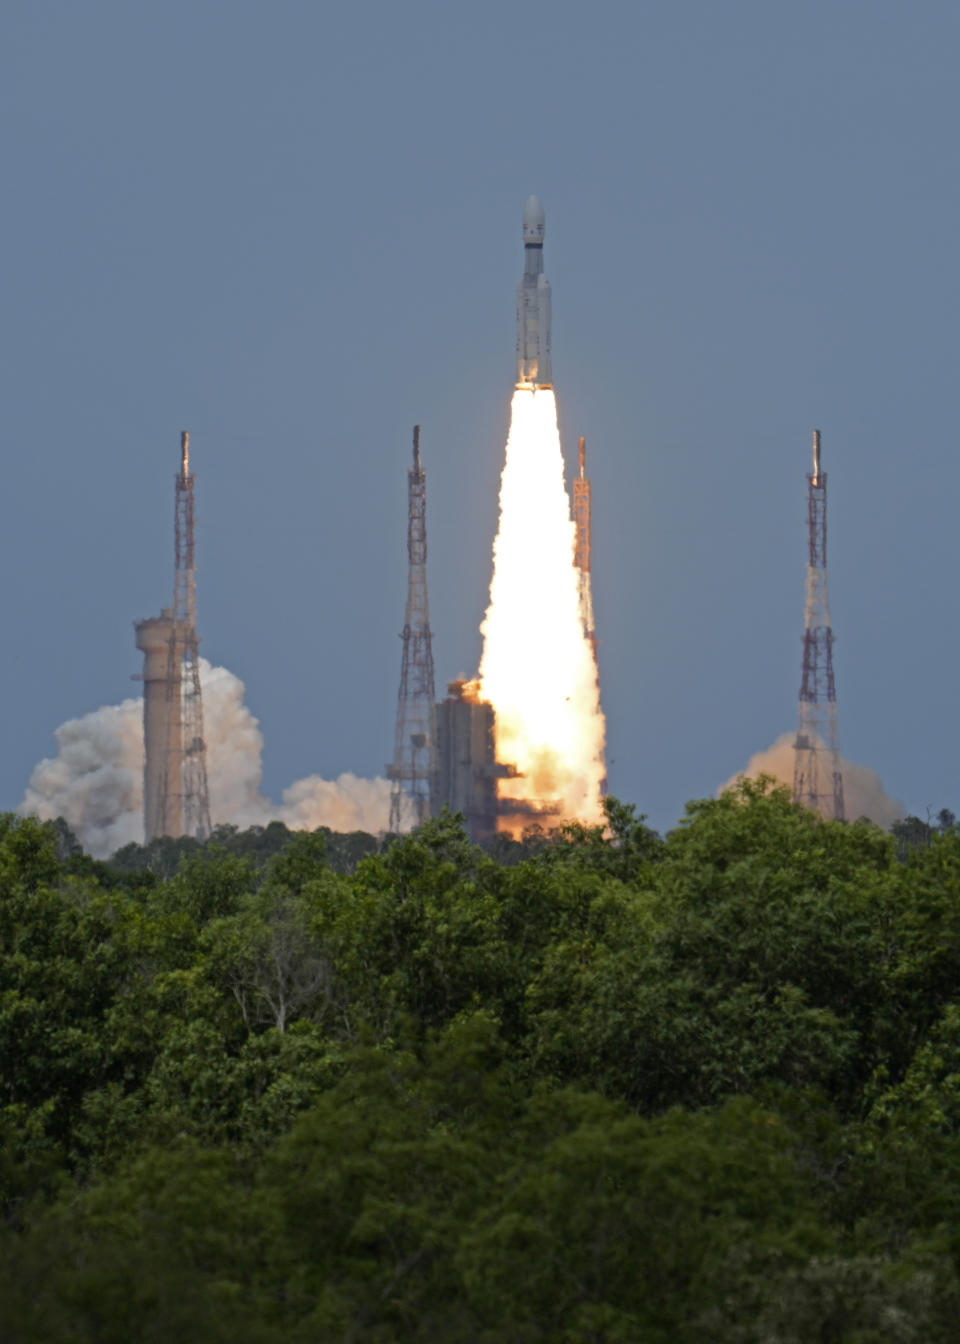 Indian spacecraft Chandrayaan-3, the word for "moon craft" in Sanskrit, lifts off from the Satish Dhawan Space Centre in Sriharikota, India, Friday, July 14, 2023. The Indian spacecraft blazed its way to the far side of the moon Friday in a follow-up mission to its failed effort nearly four years ago to land a rover softly on the lunar surface, the country's space agency said. A successful landing would make India the fourth country, after the United States, the Soviet Union, and China, to achieve the feat. (AP Photo/Aijaz Rahi)